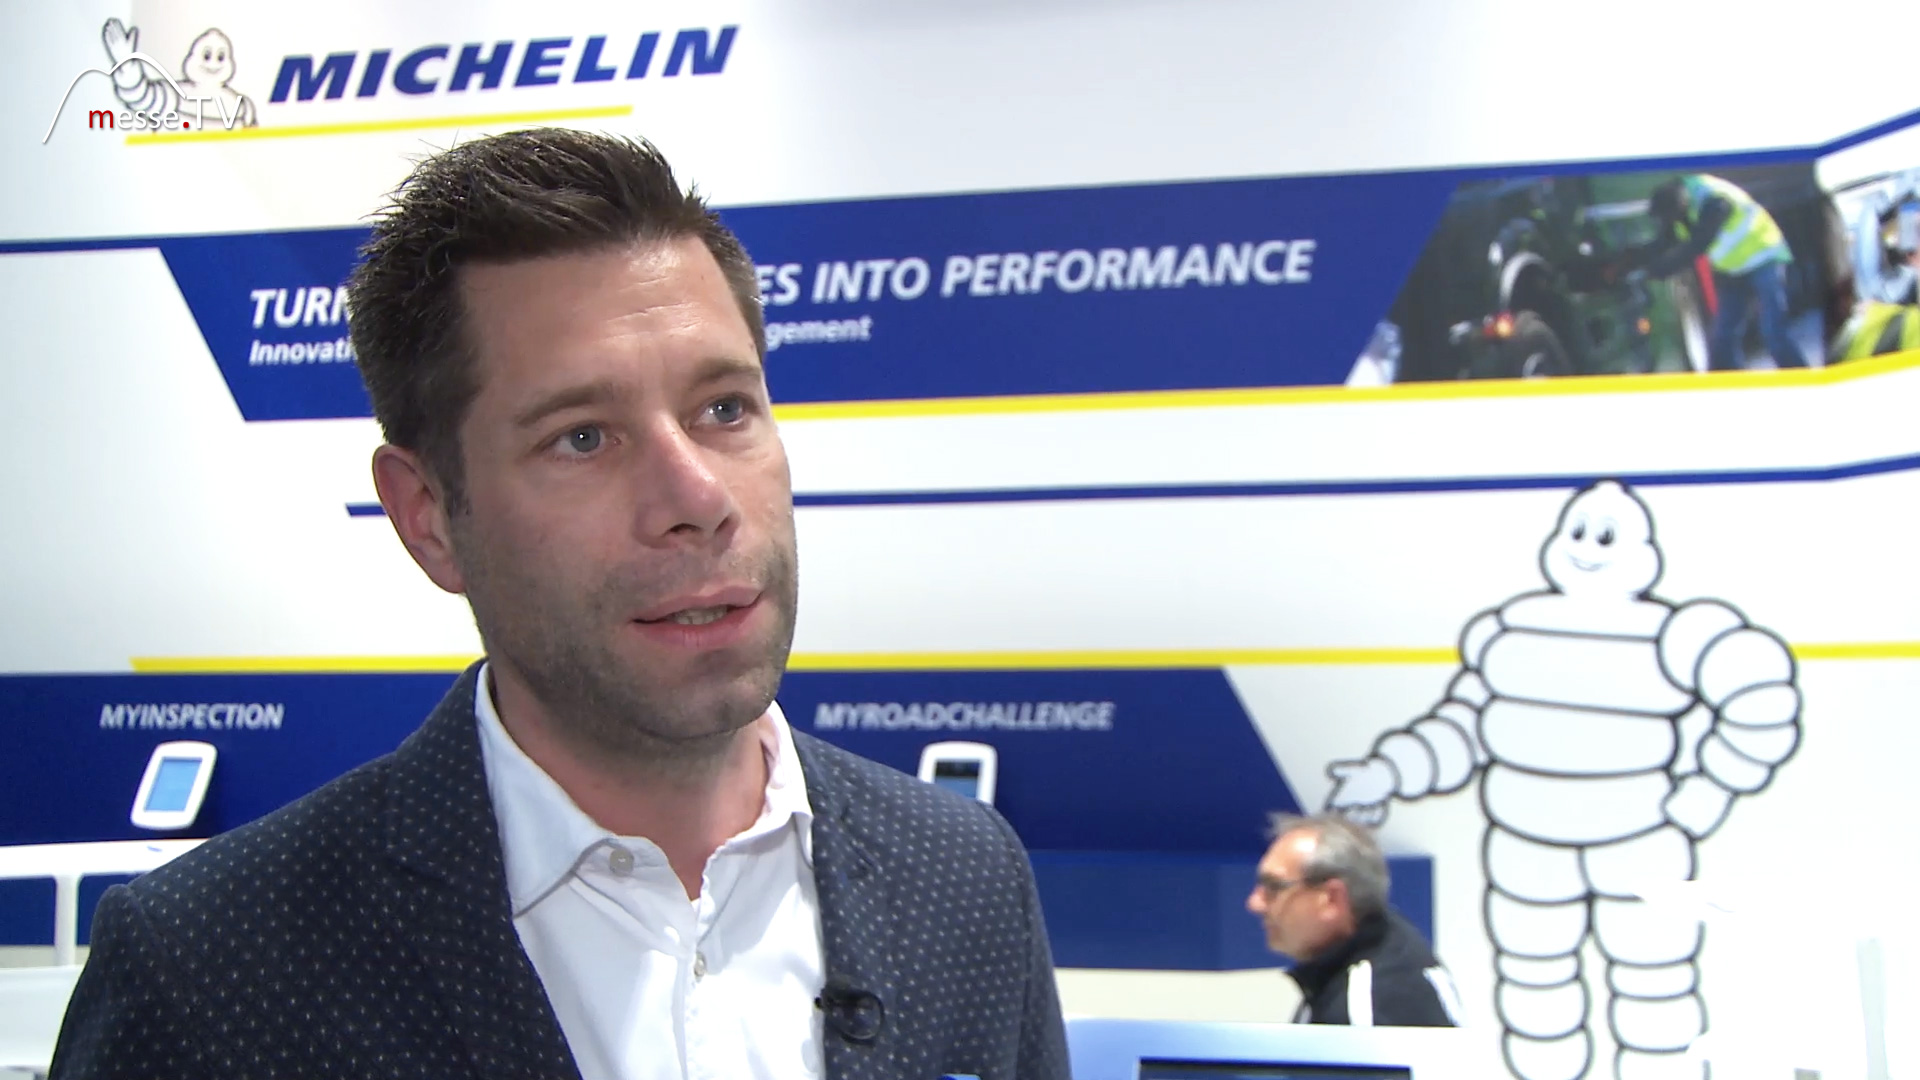 MICHELIN Interview Digitalization offers for customers